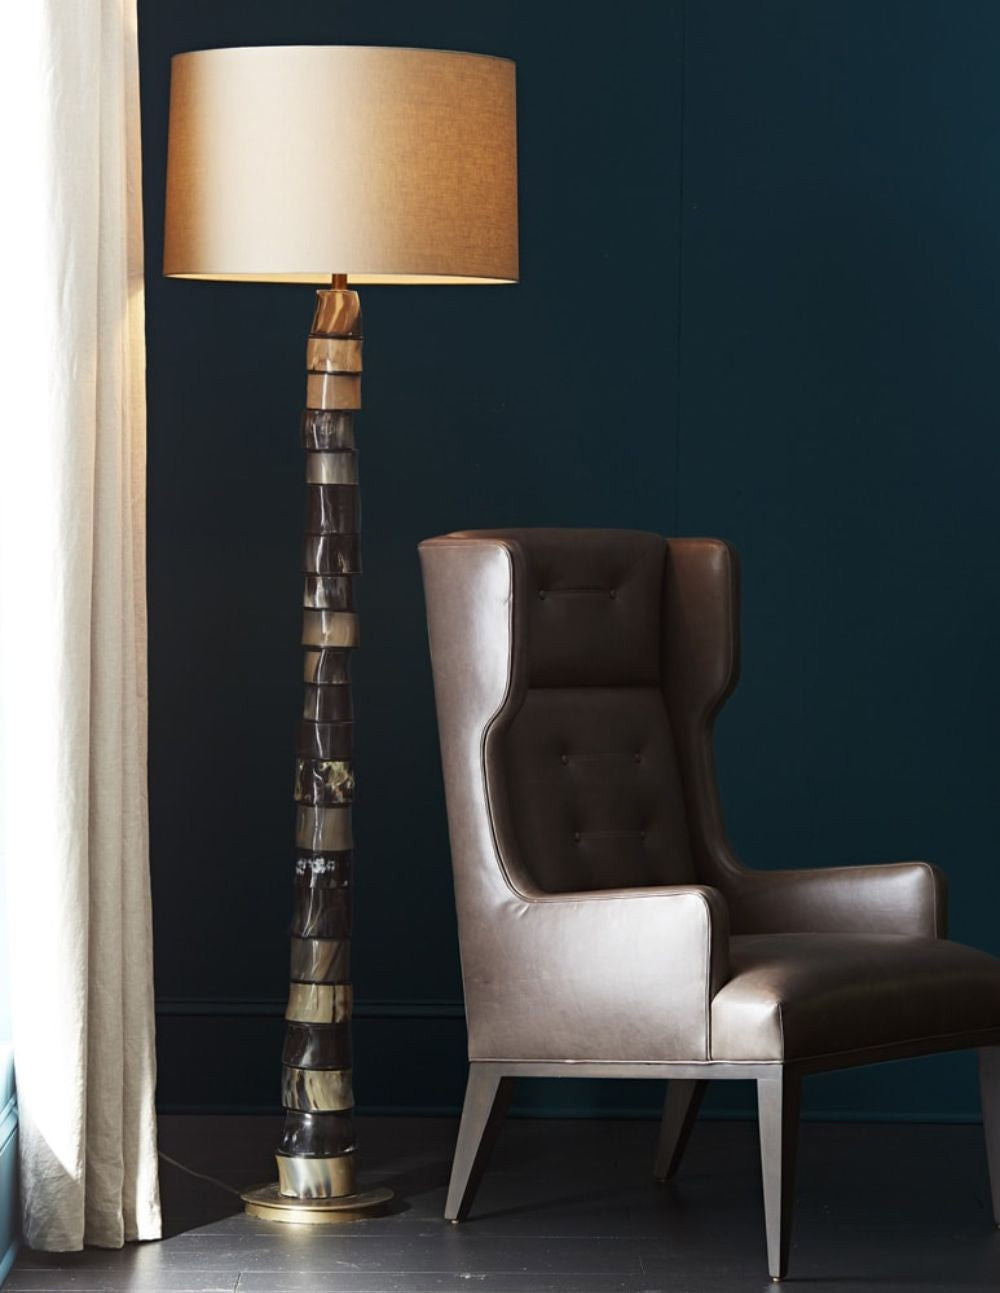 One Light Floor Lamp from the Miller collection in Natural finish